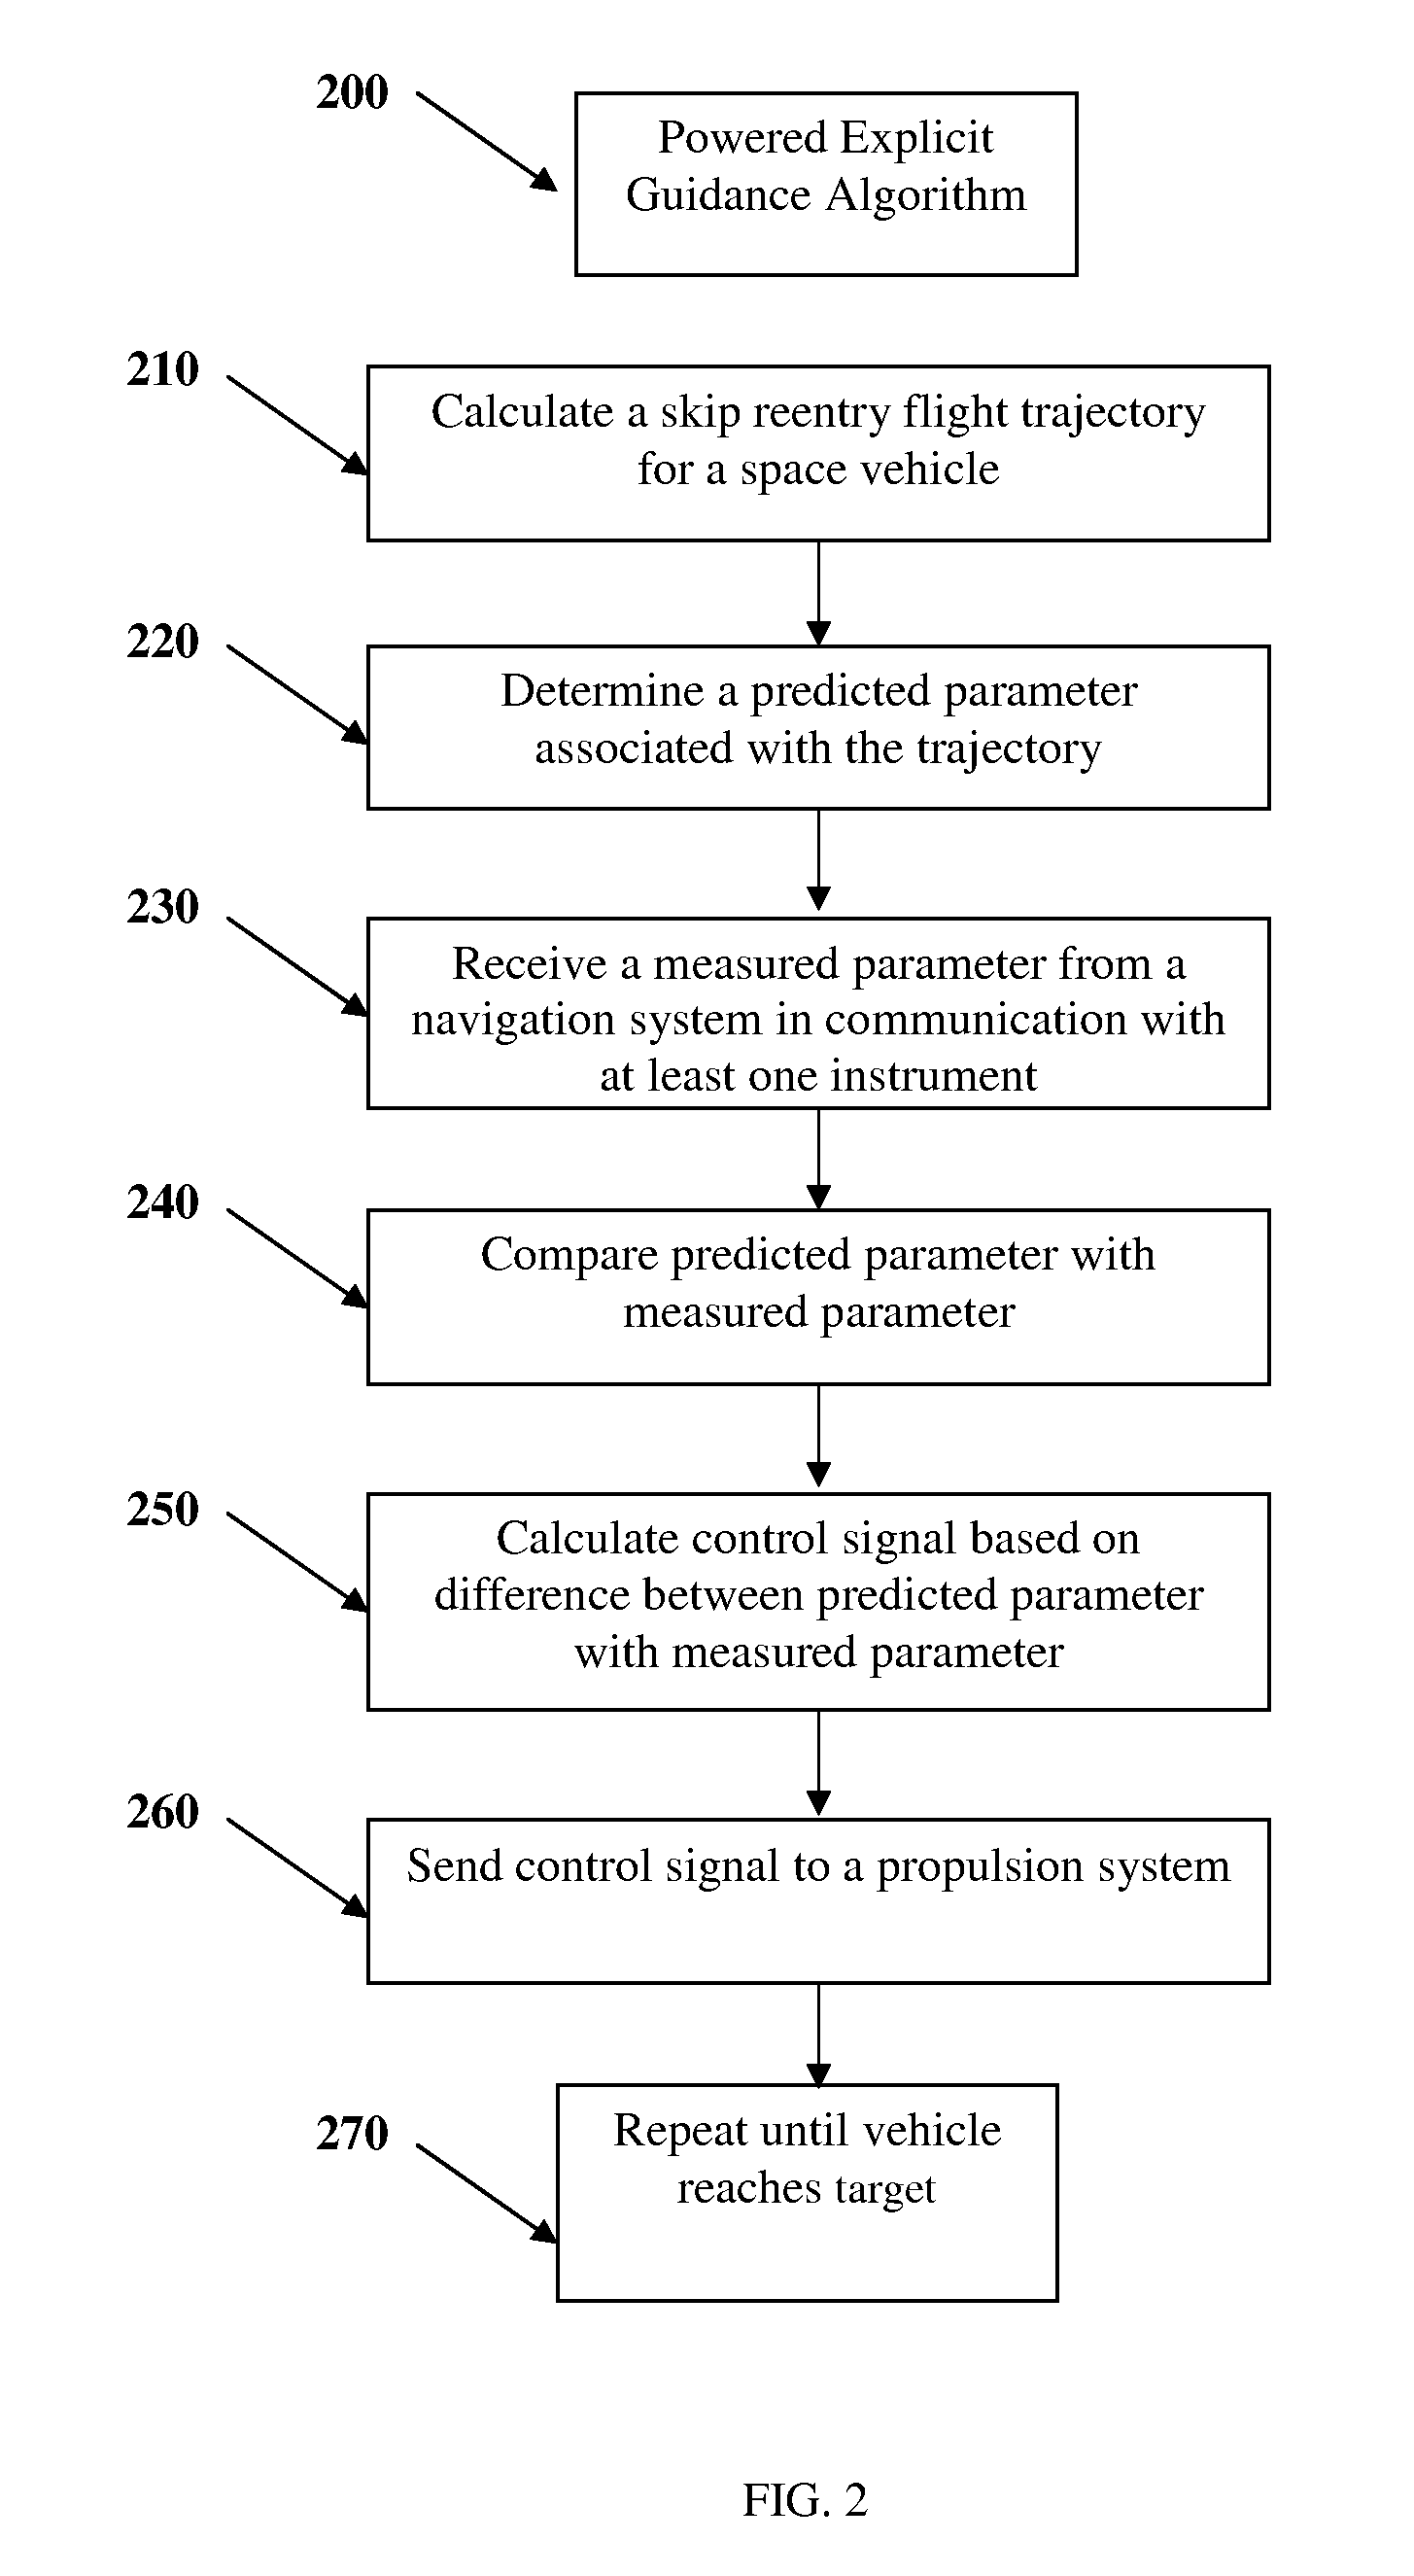 Propulsive guidance for atmospheric skip entry trajectories